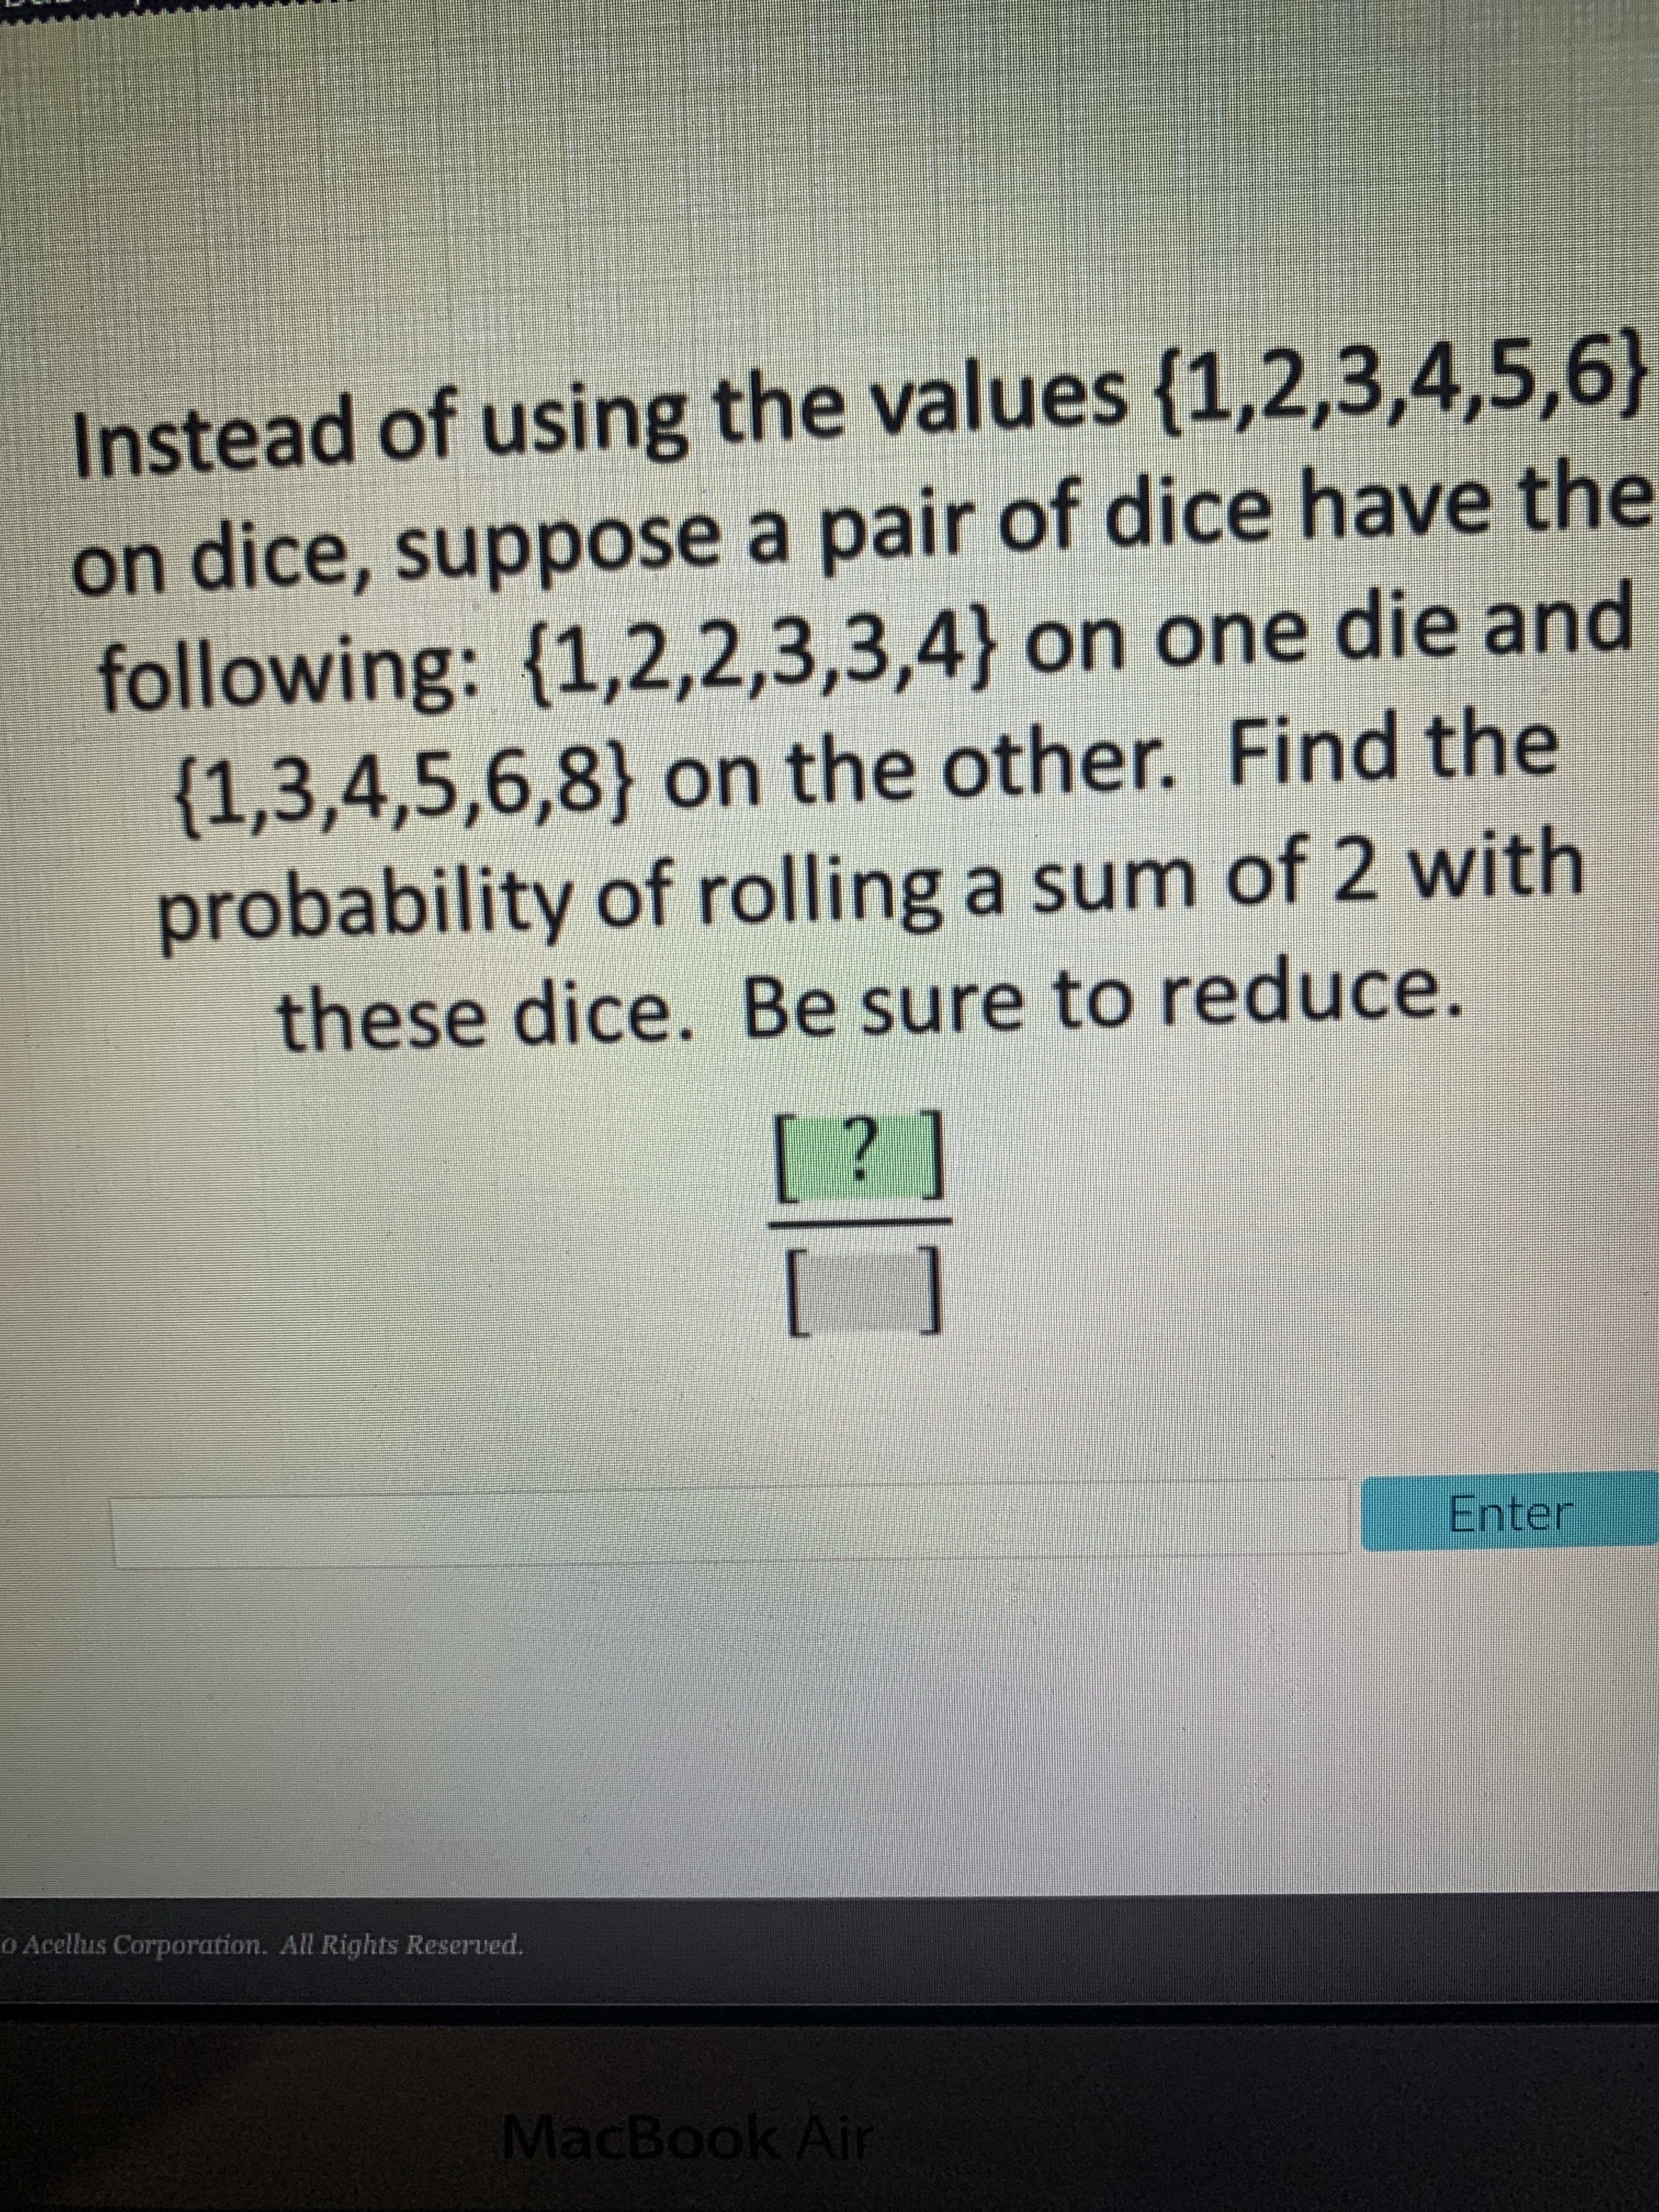 Instead of using the values {1,2,3,4,5,6}
